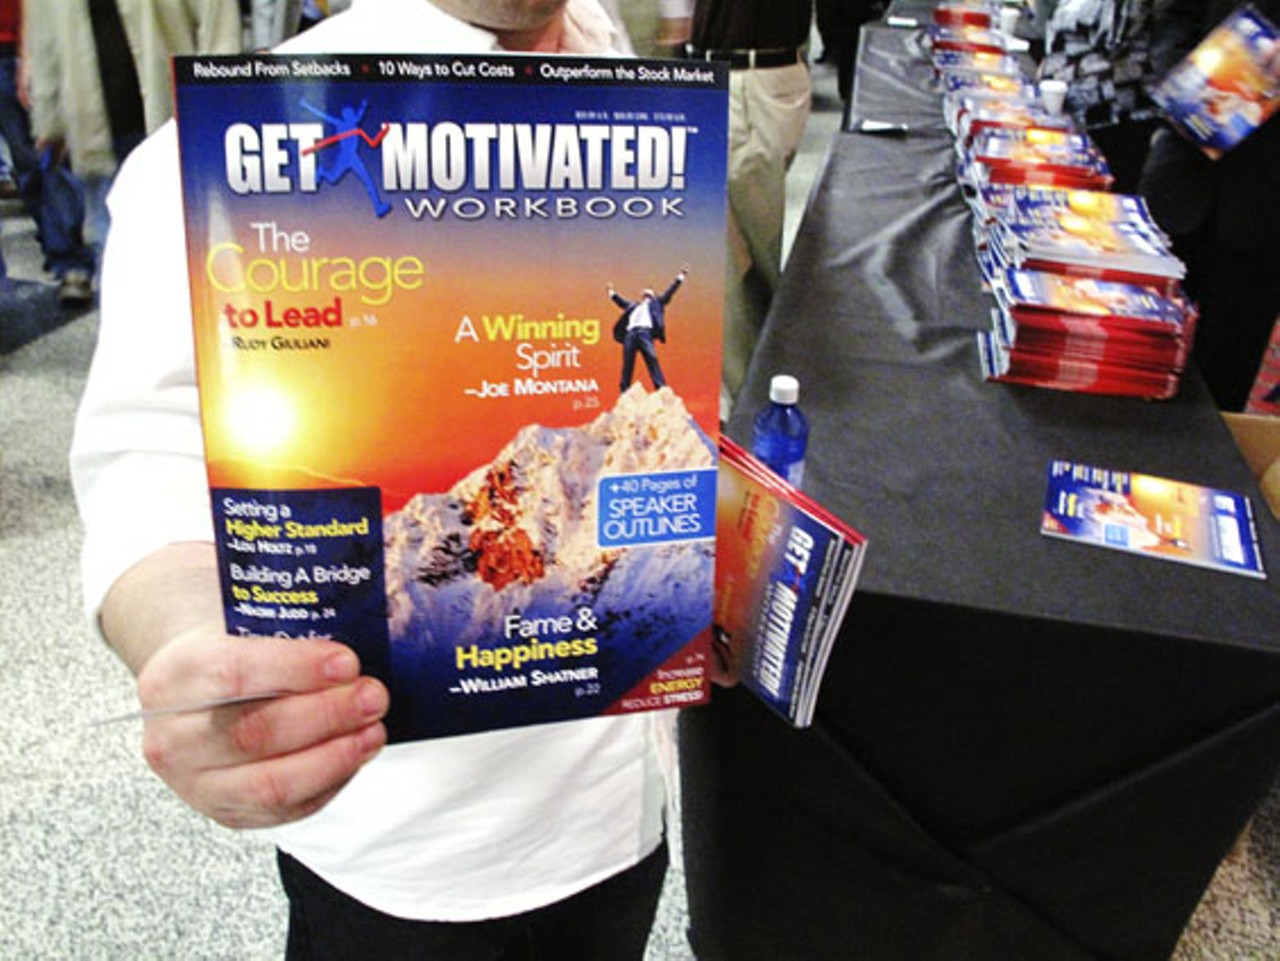 Get Motivated! workbooks were $4.95 if you pre-ordered them before seeing how crappy they were.